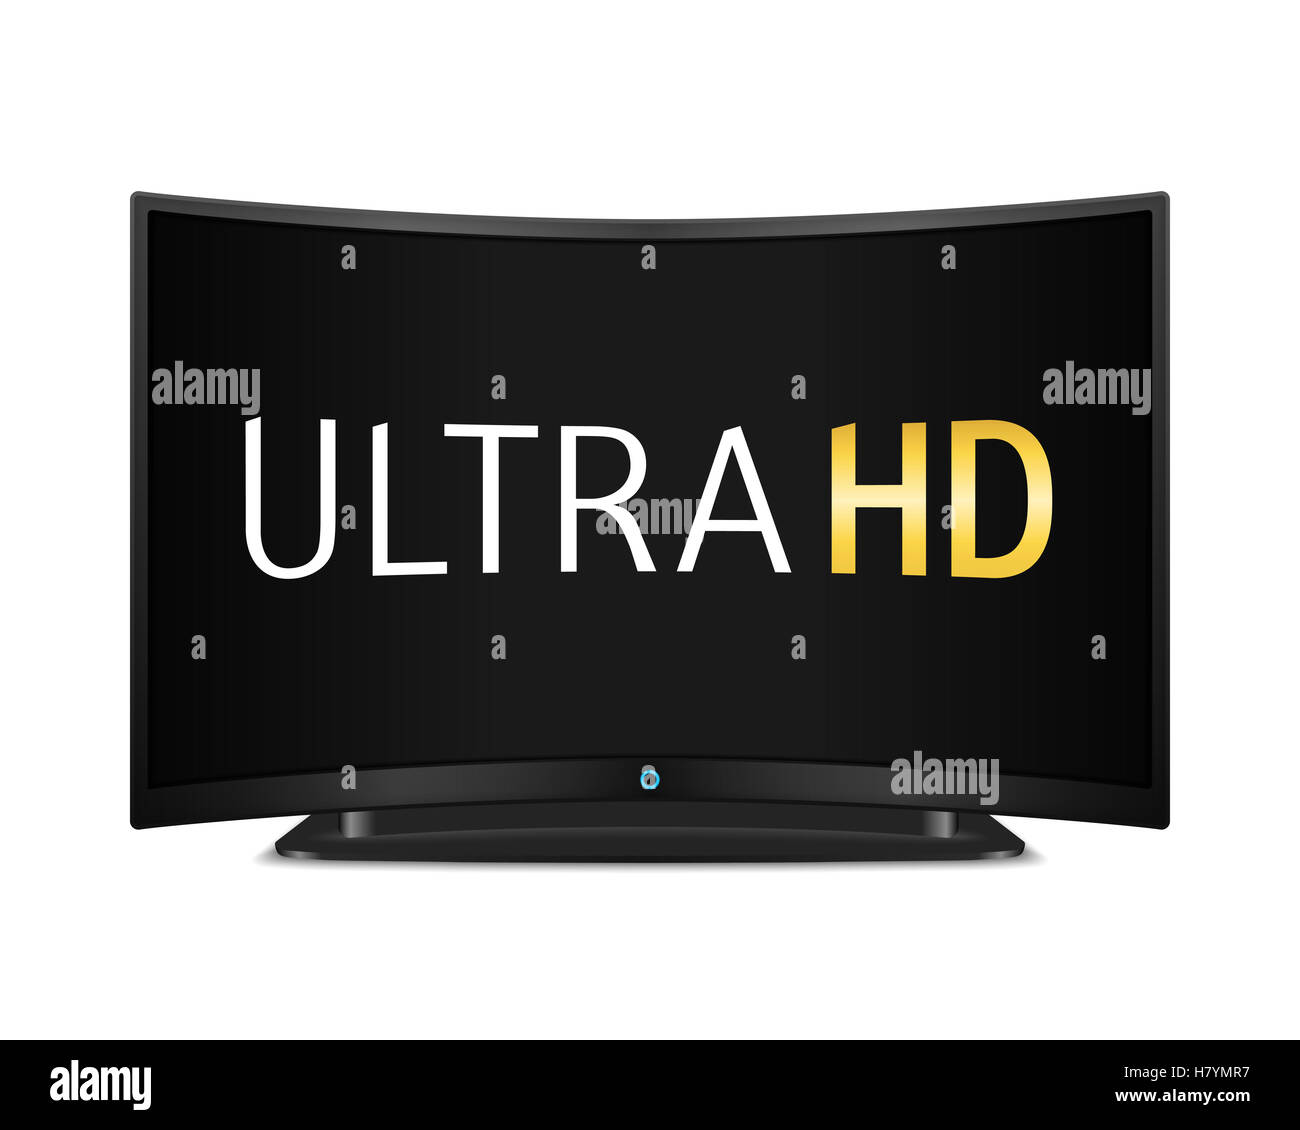 Ultra HD TV with curved screen Stock Photo